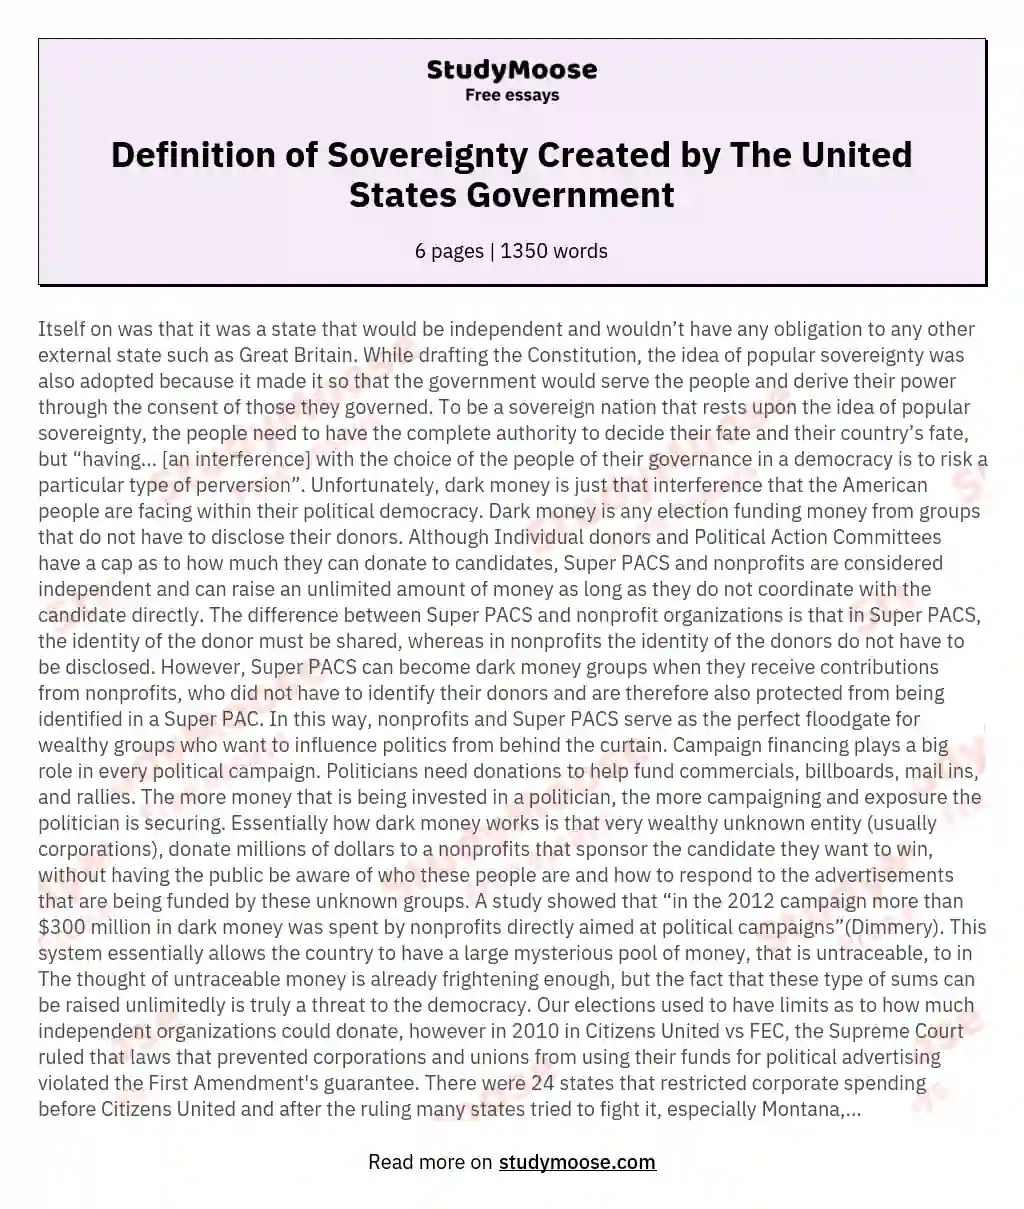 Definition of Sovereignty Created by The United States Government essay